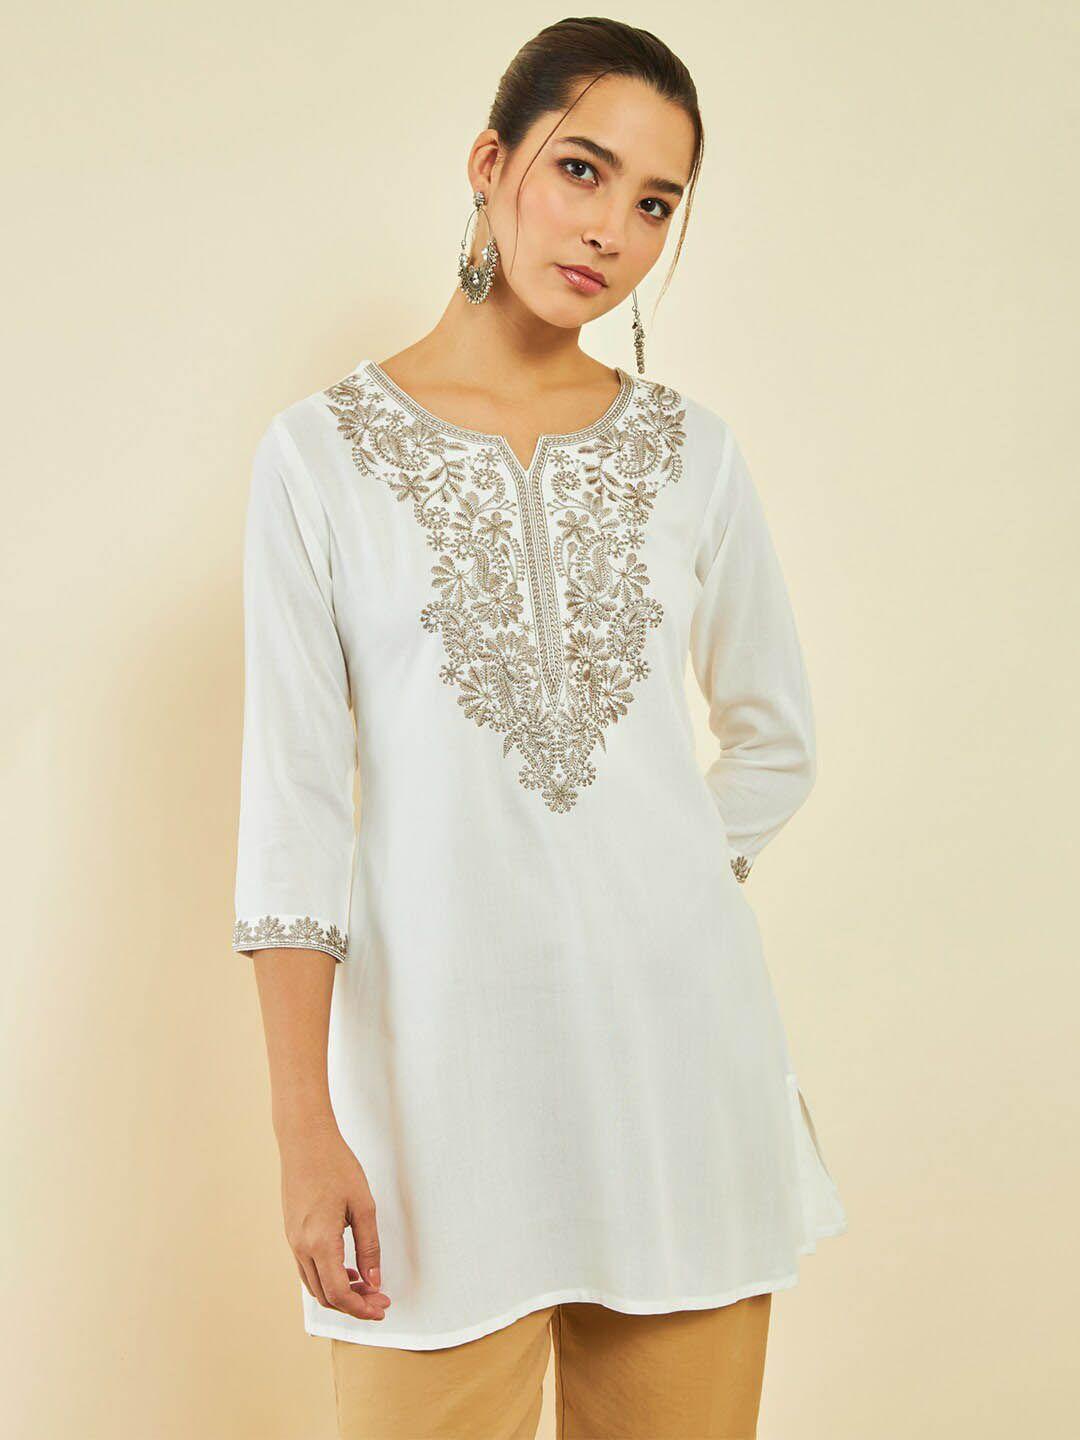 Soch Ethnic Motifs Embroidered Tunic